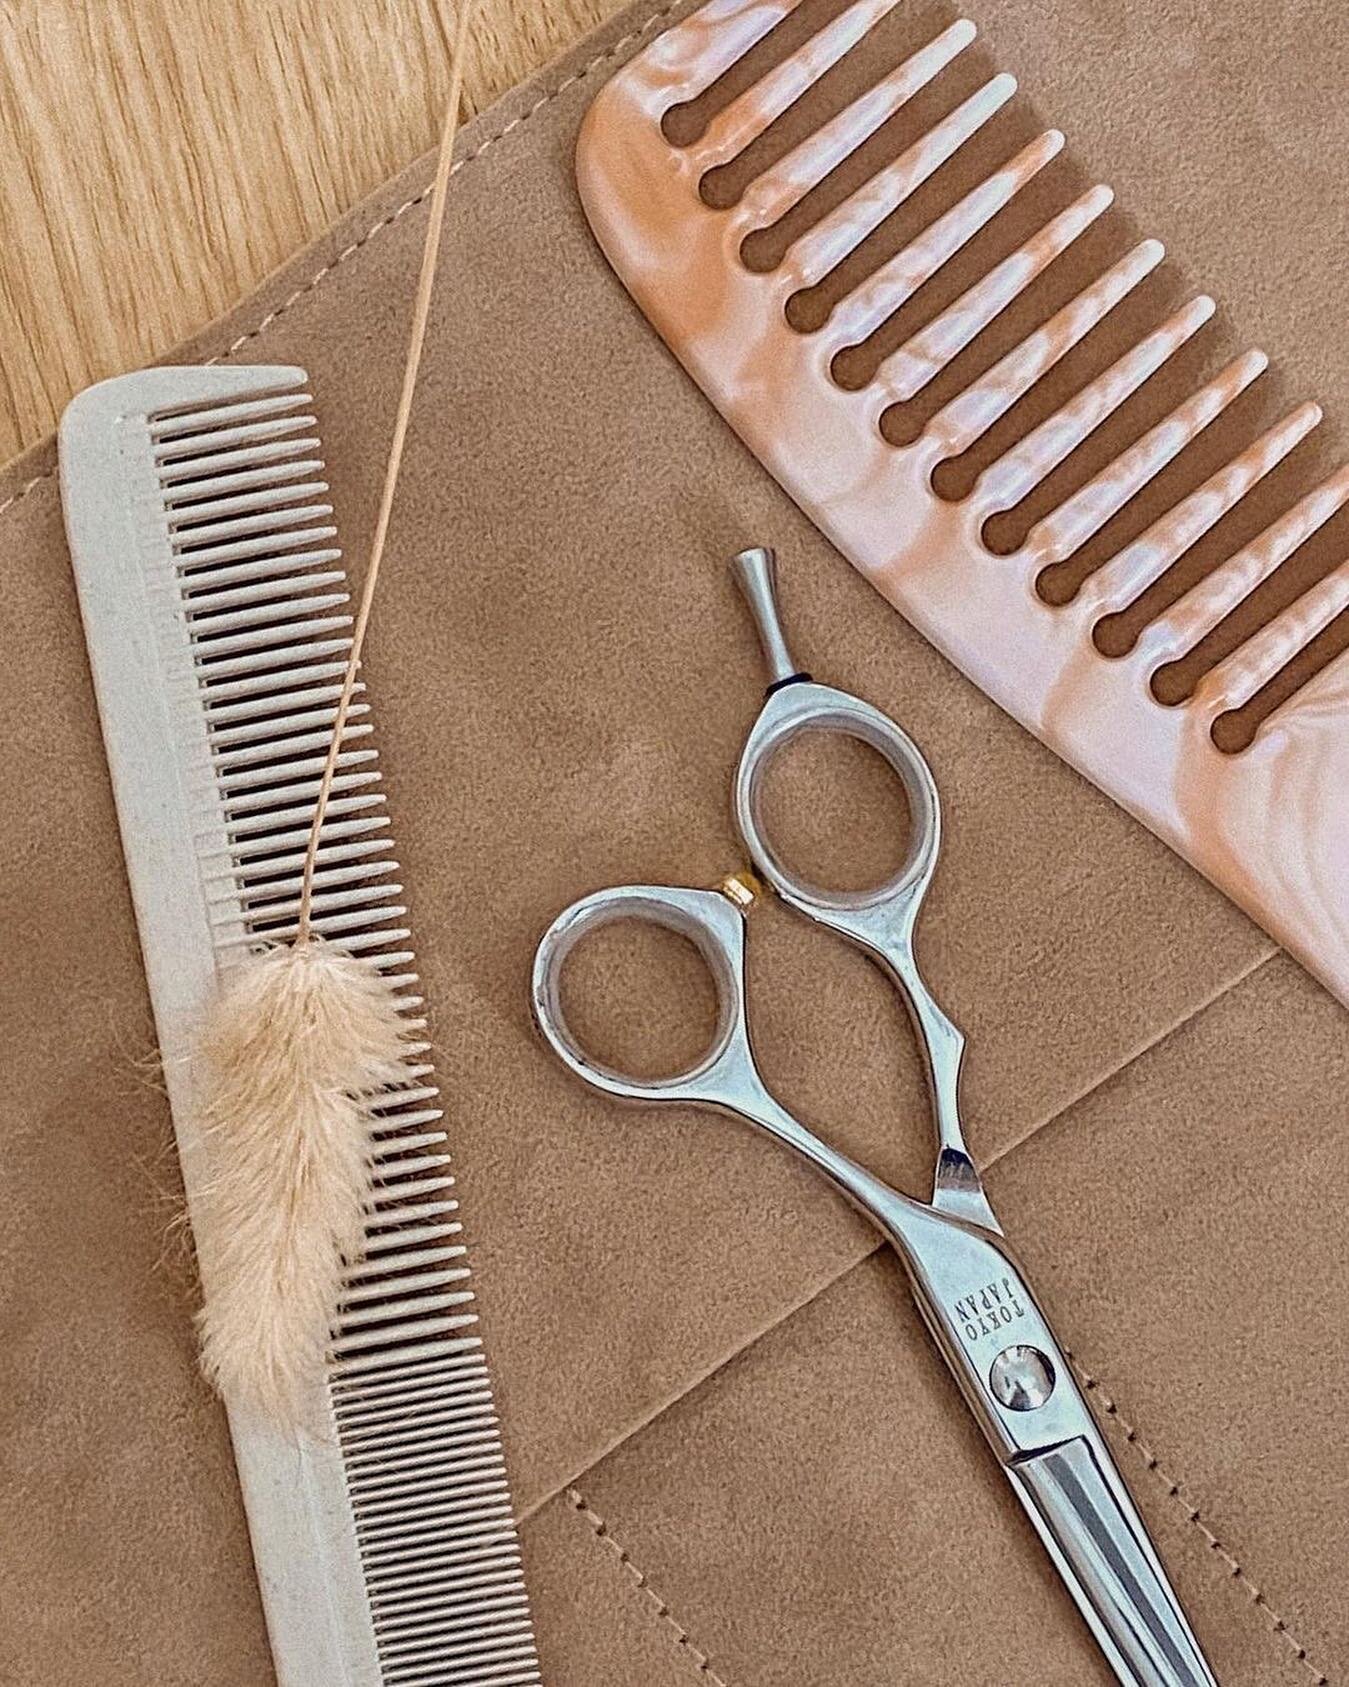 When it comes to hair stylists, Sosa Designs can be a game-changer for your business. We specialize in rebranding licensed beauty professionals' Instagrams, which can help you attract more clients and showcase your skills. With our expertise, we can 